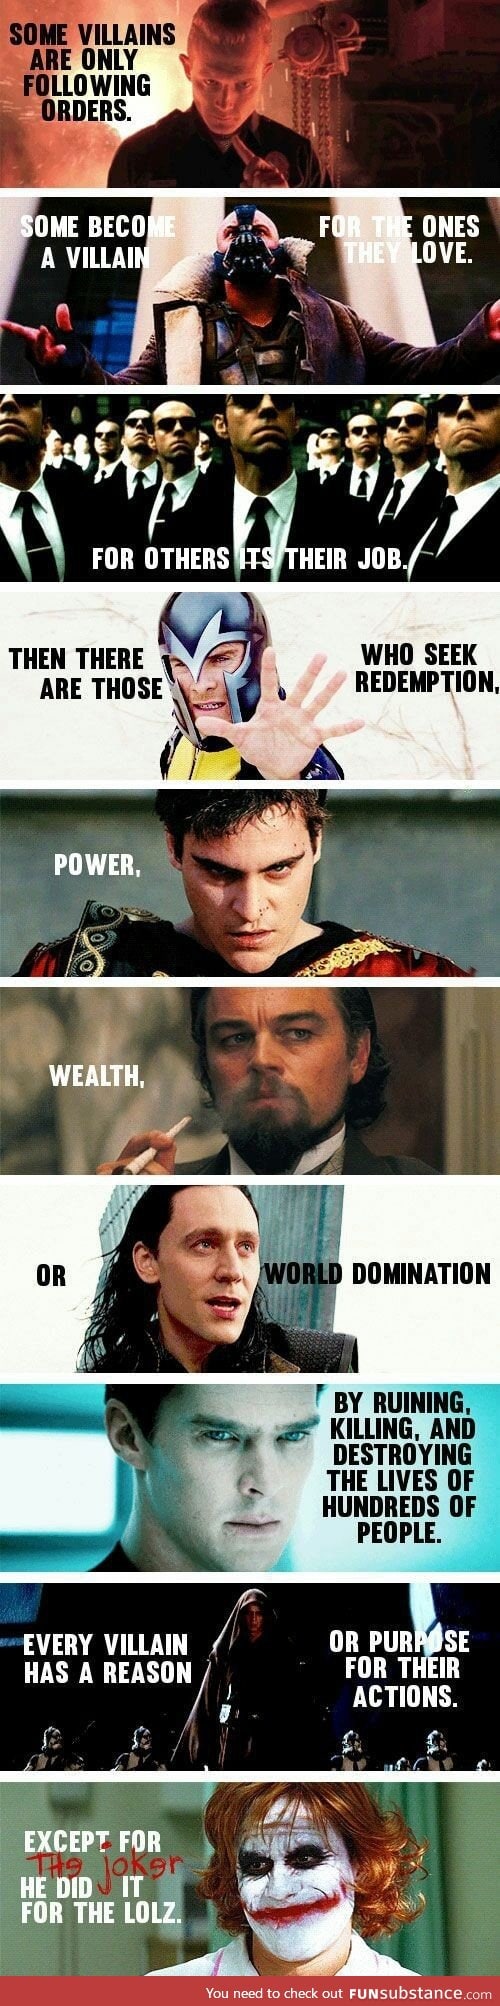 Different villains and their reasons behind it